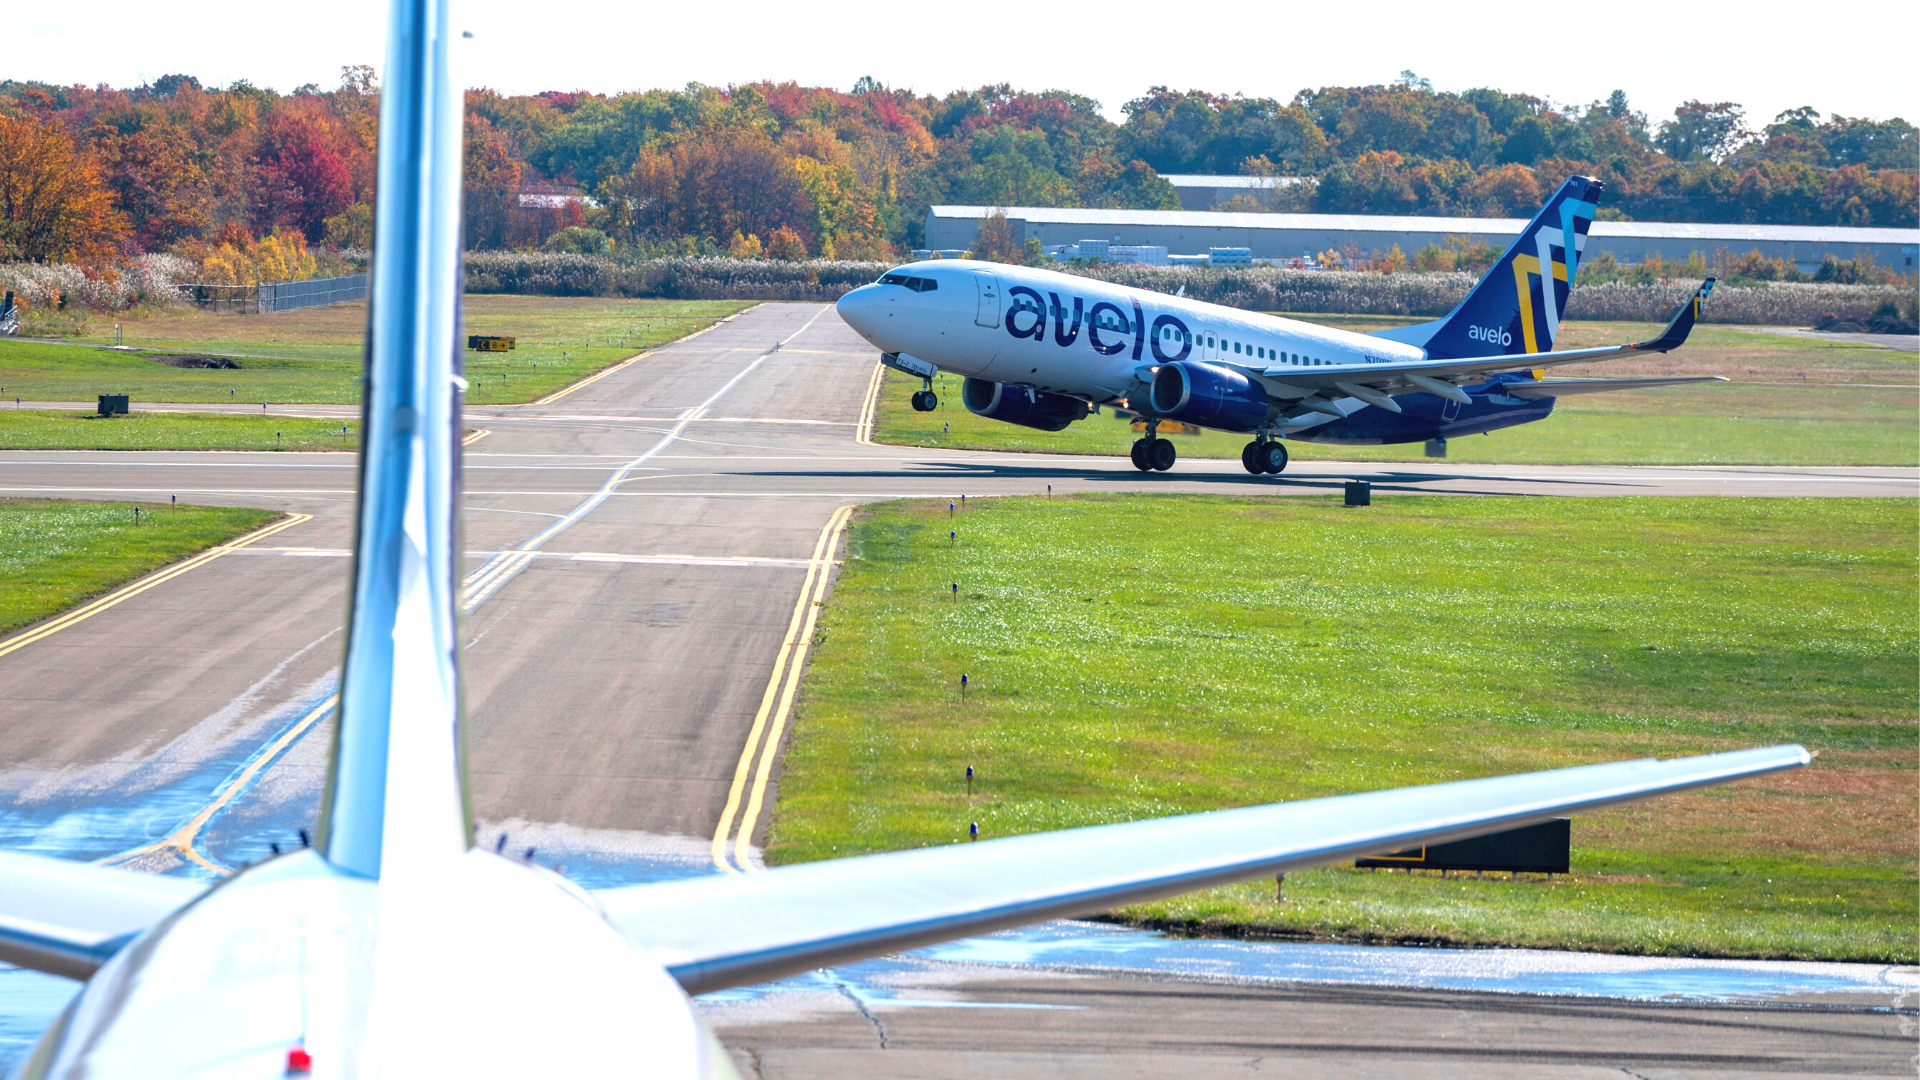 Avelo Airlines's success authorizes Wilmington Airport for more federal funding. (Bruce Snyder/Avelo Airlines)